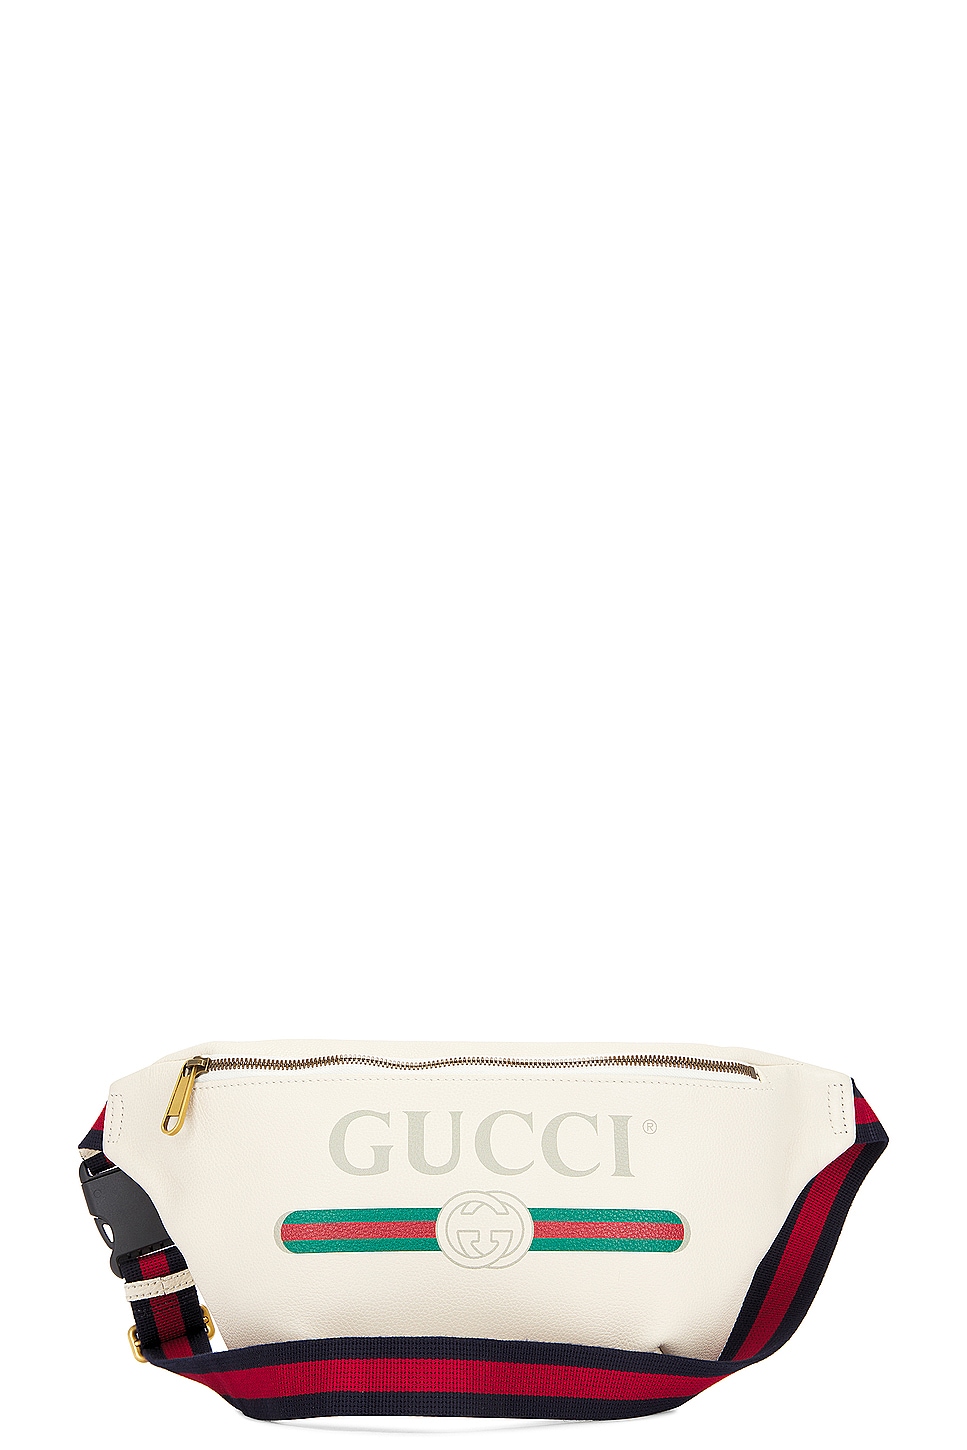 Gucci Marmont Waist Bag in White